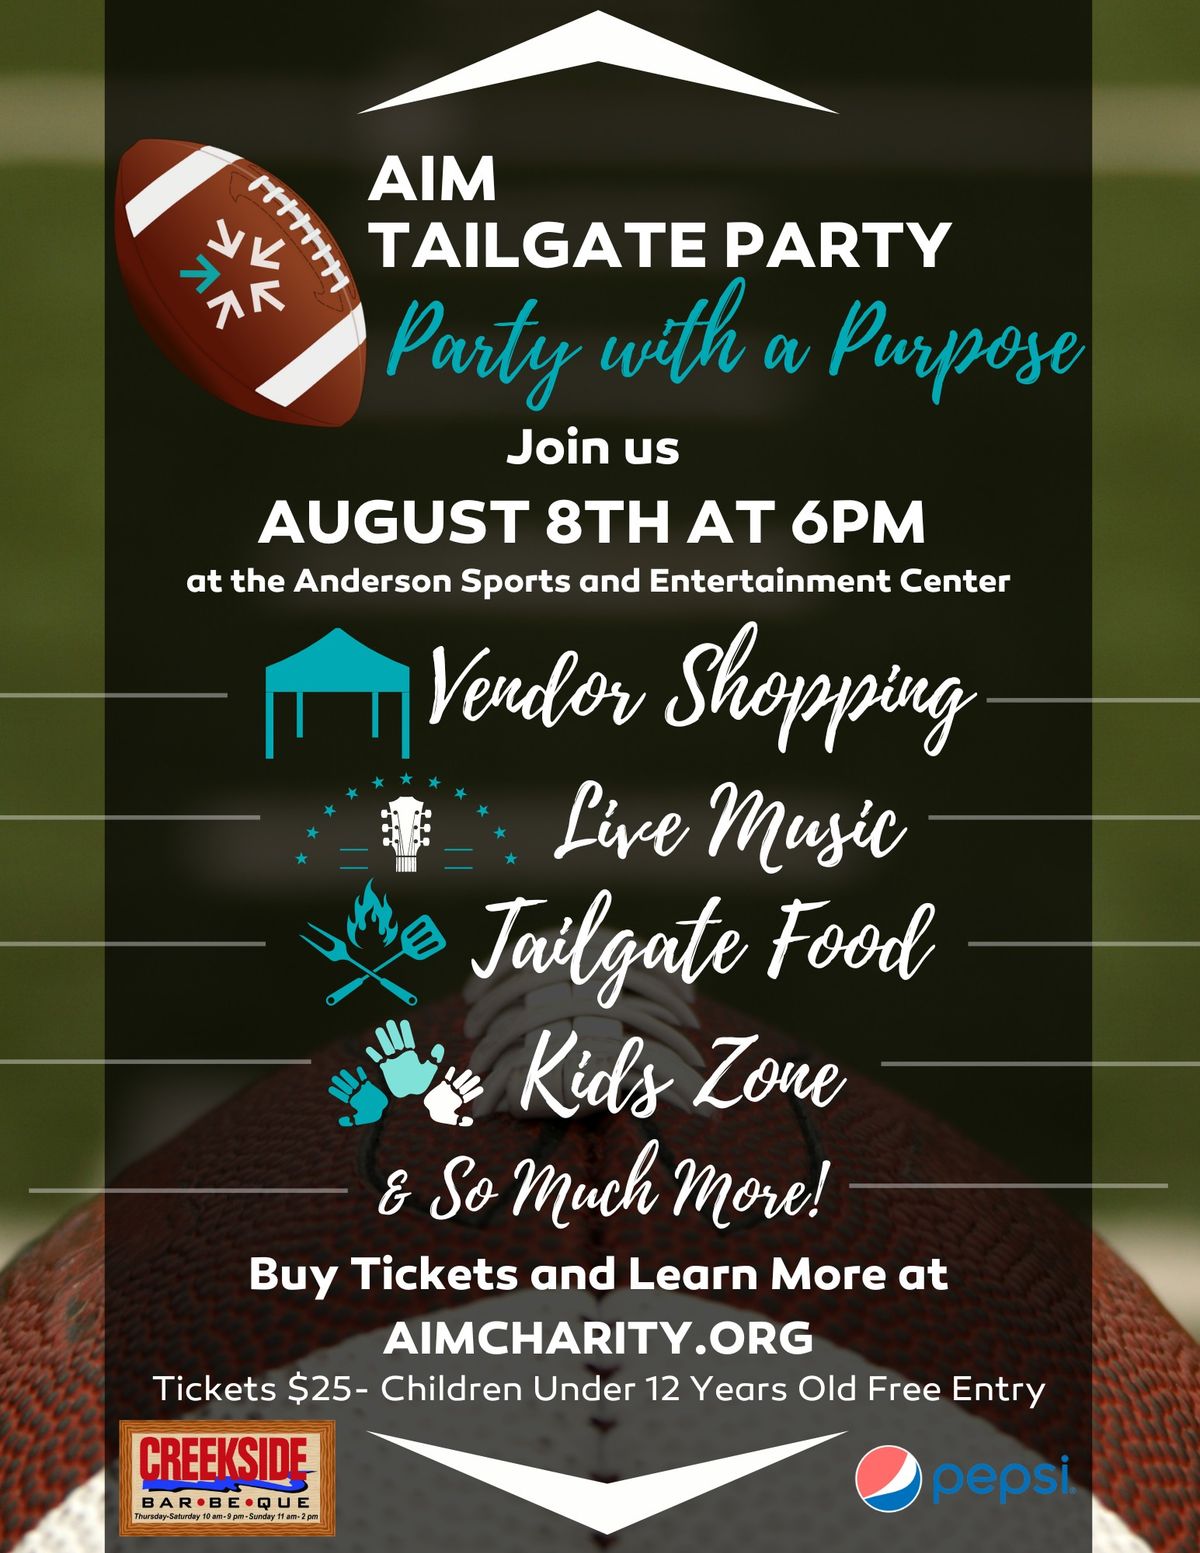 AIM Tailgate Party: Party with a Purpose